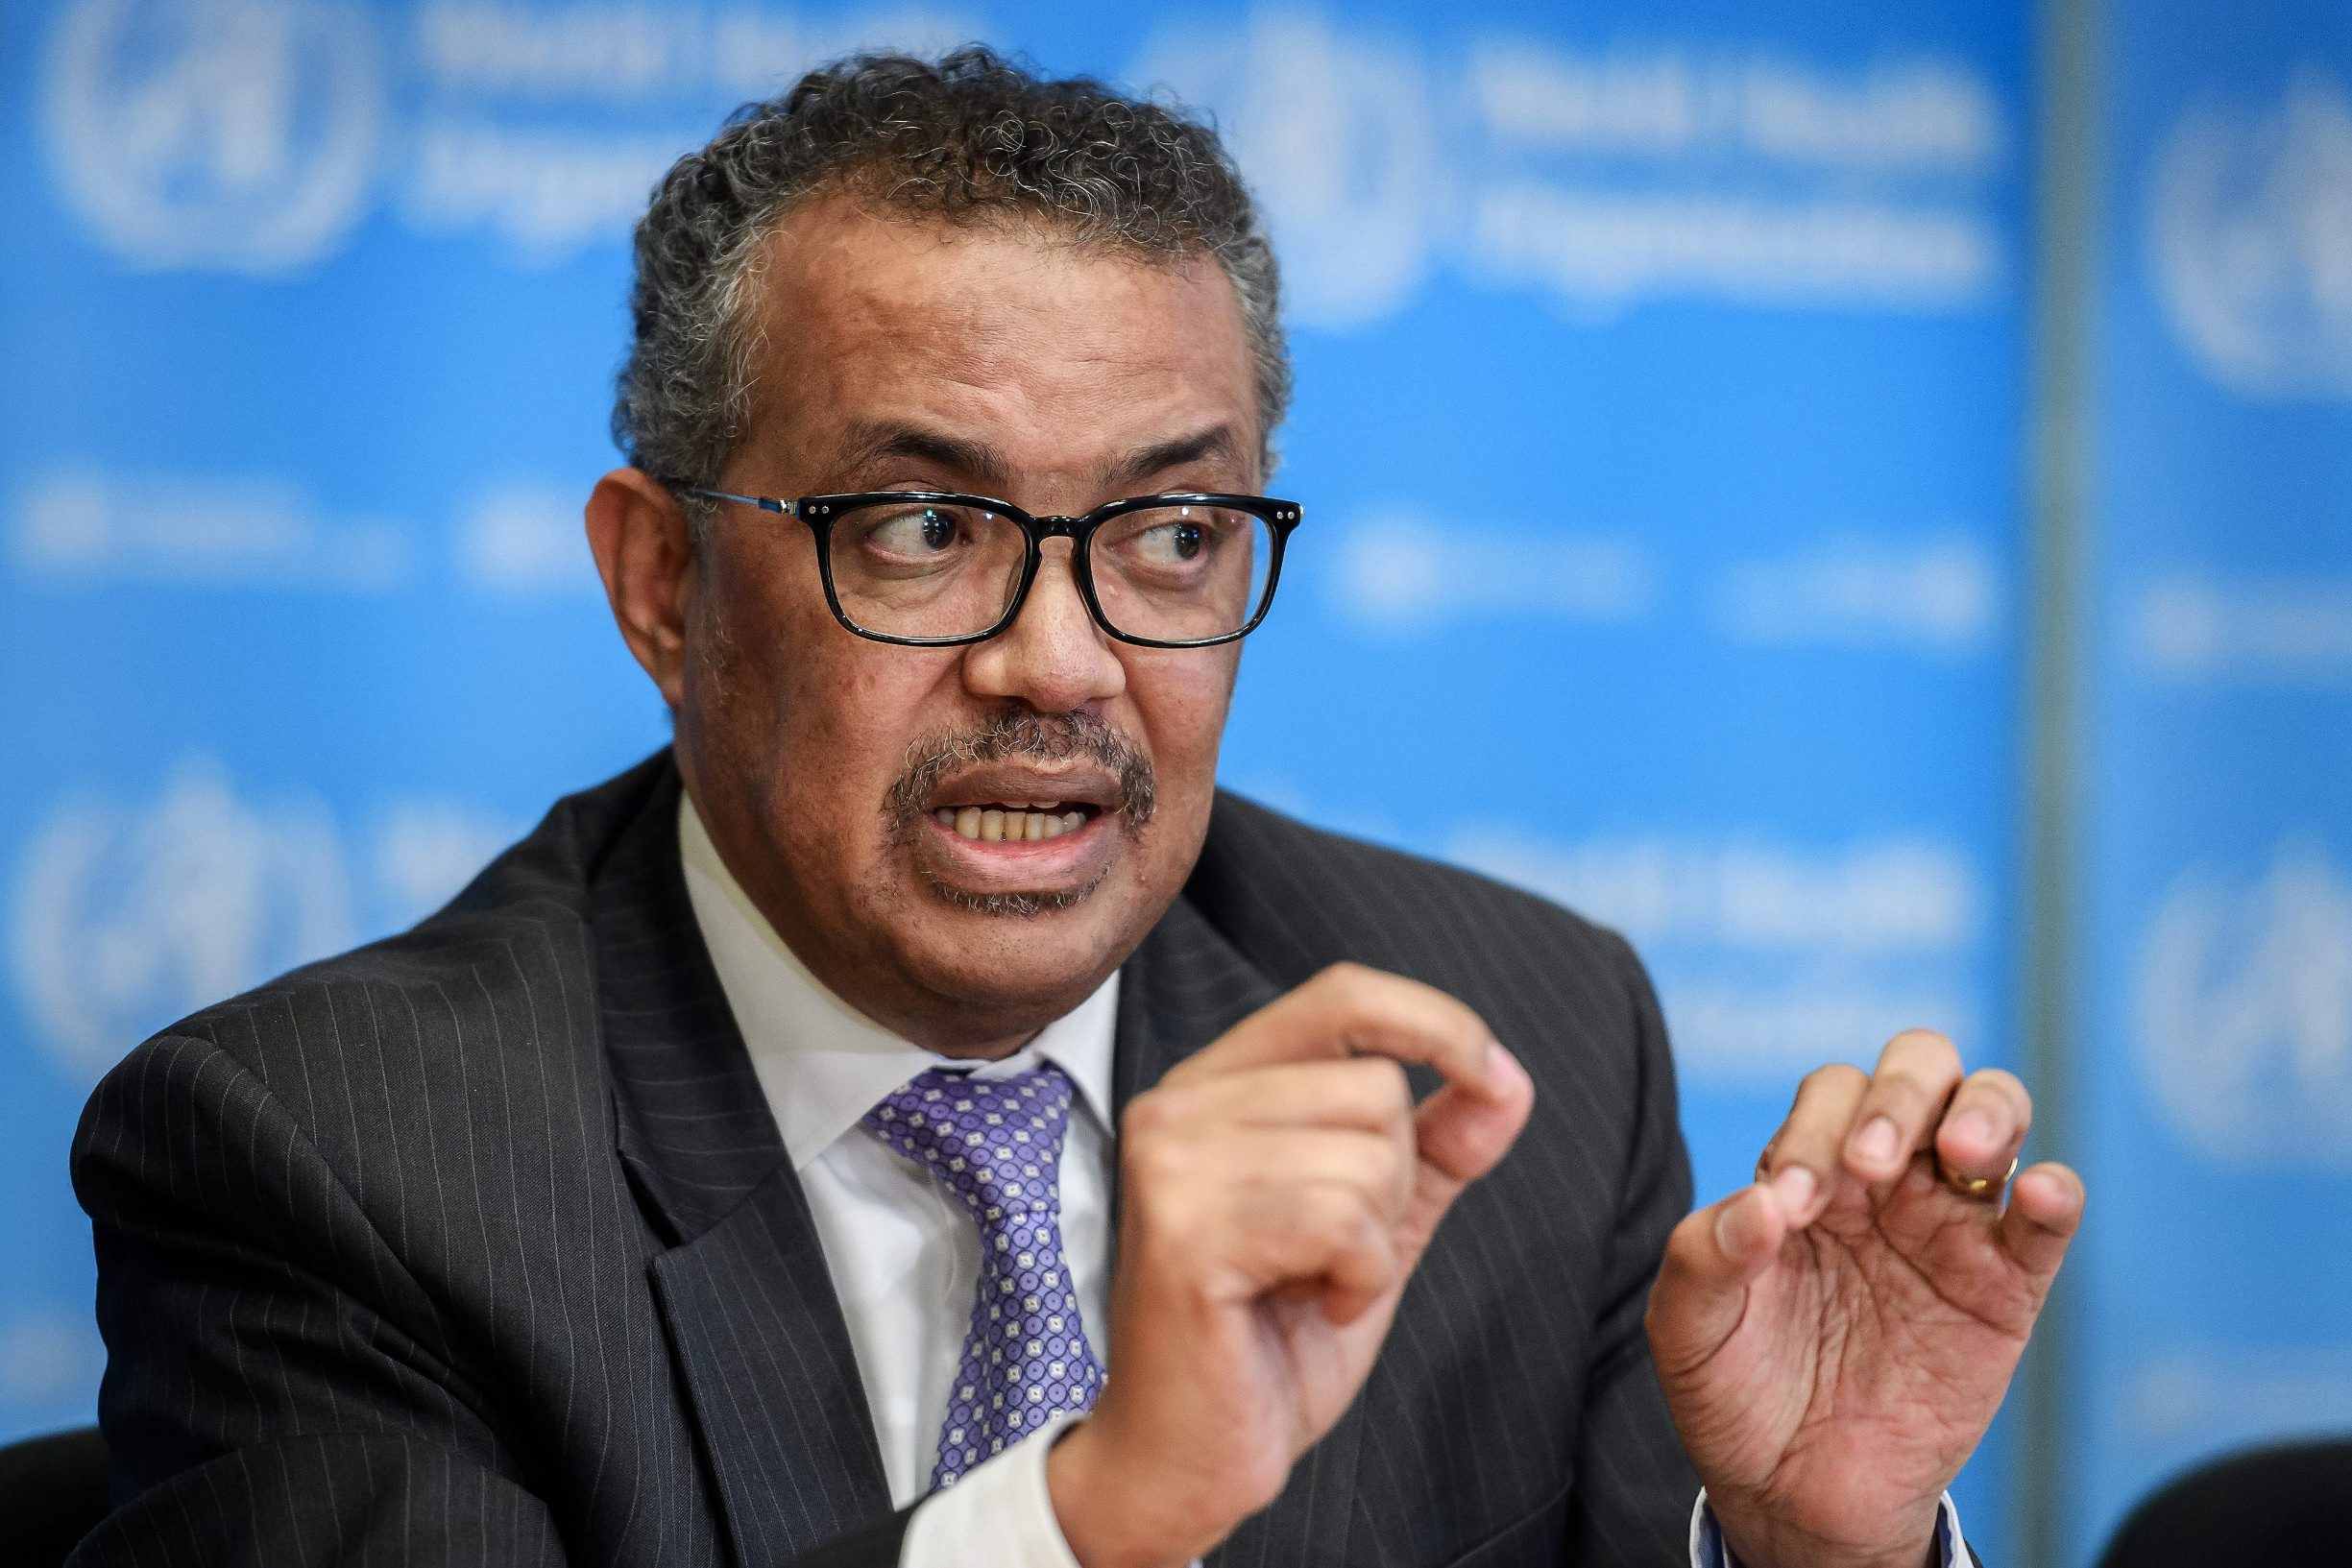 (FILES) In this file photo taken on March 09, 2020, World Health Organization (WHO) Director-General Tedros Adhanom Ghebreyesus speaks during a daily press briefing on COVID-19 virus at the WHO headquaters in Geneva. - US President Donald Trump announced on April 14, 2020, a suspension of US funding to the World Health Organization because he said it had covered up the seriousness of the COVID-19 outbreak in China before it spread around the world. Trump told a press conference he was instructing his administration to halt funding while 